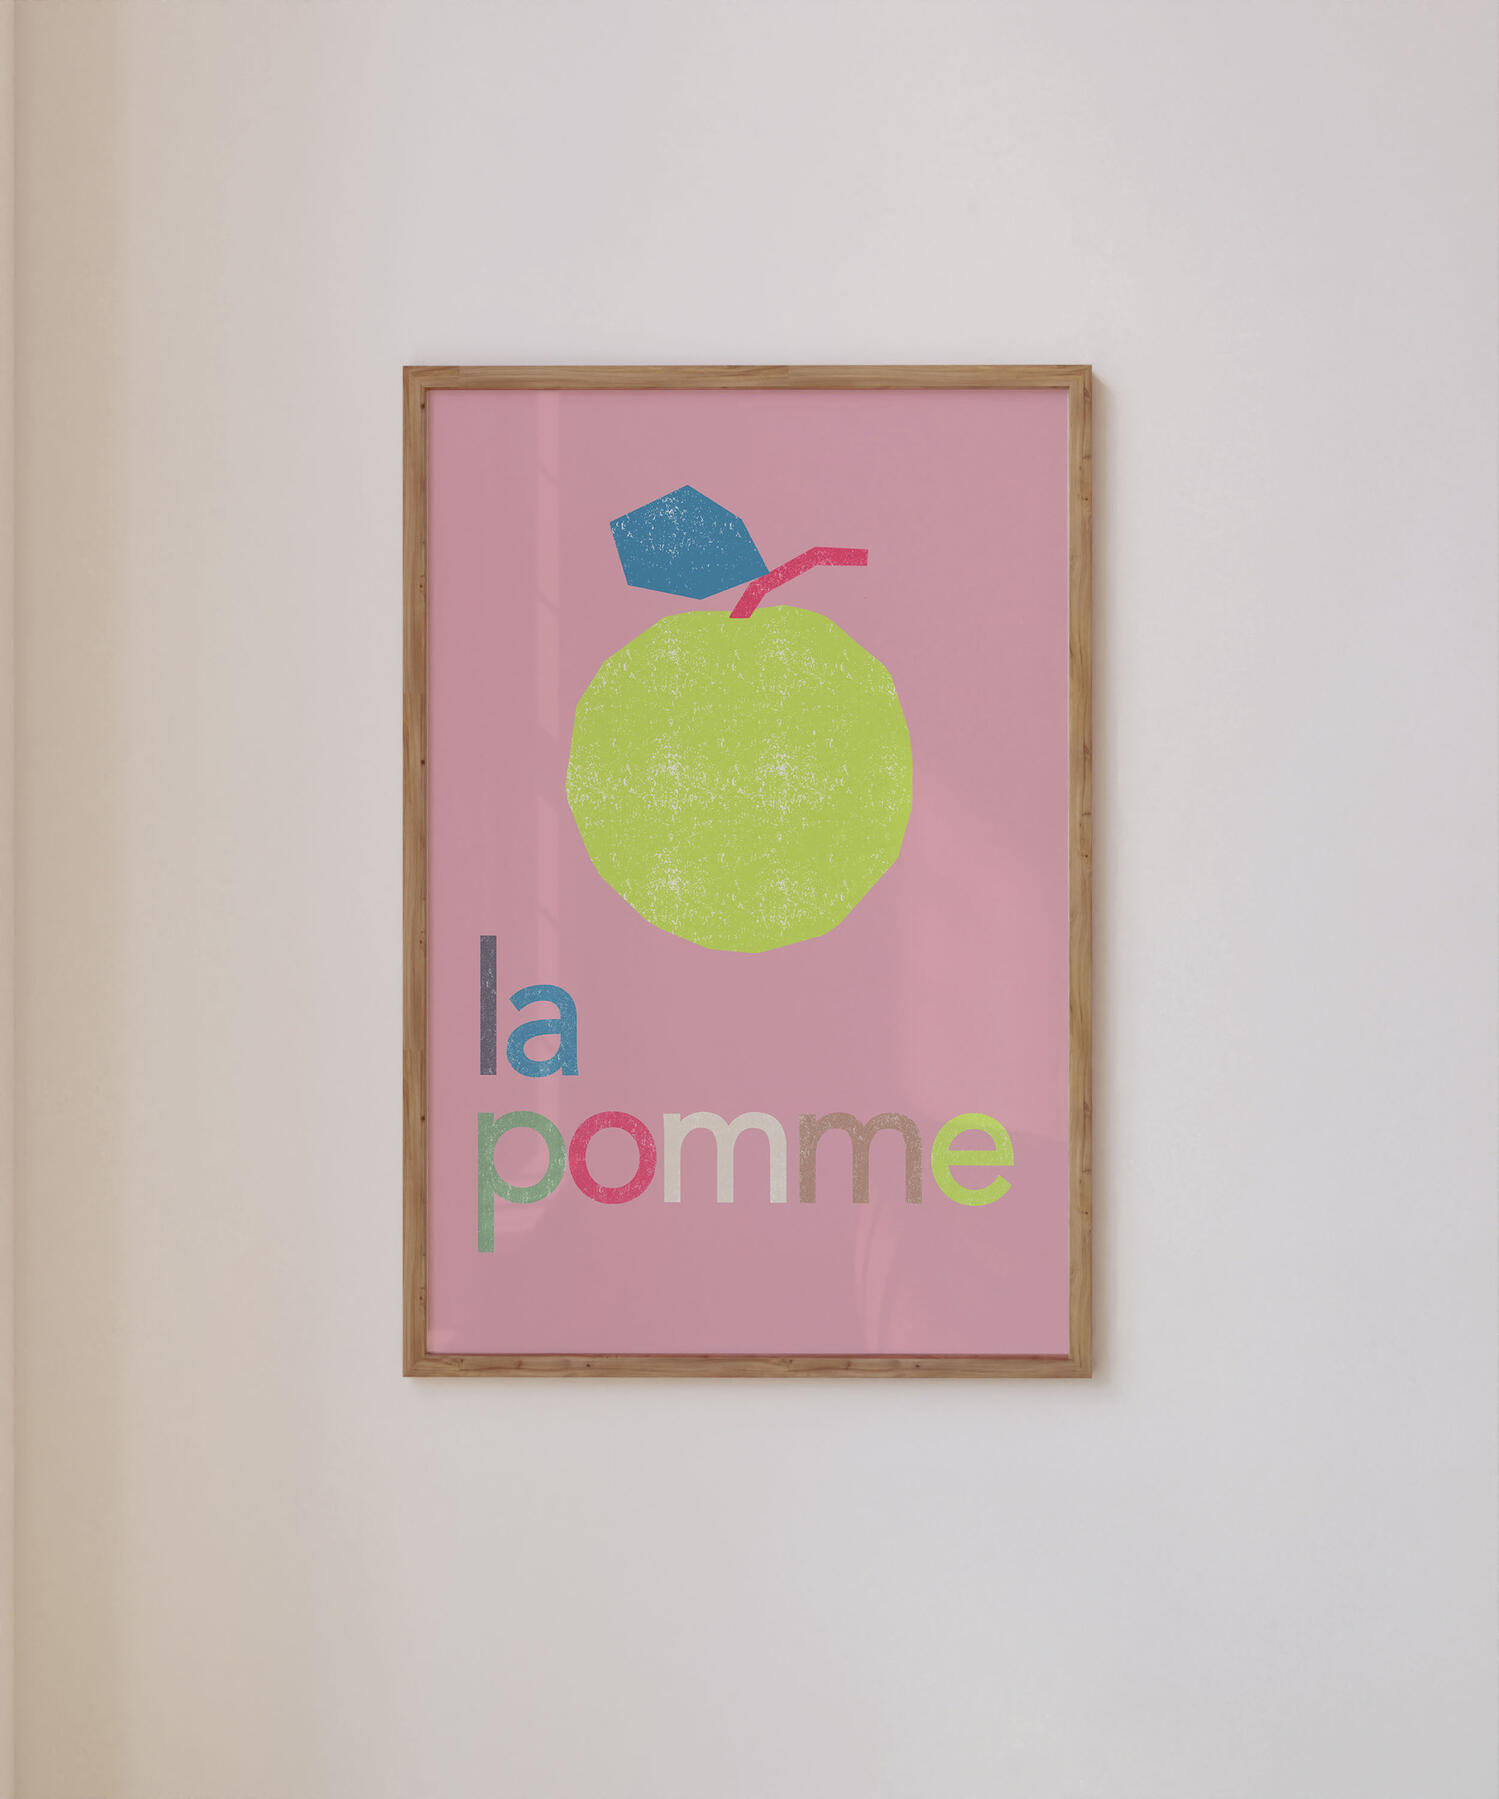 La pomme print. French kitchen art print. House of Clouds. Living room print. Typographic print.